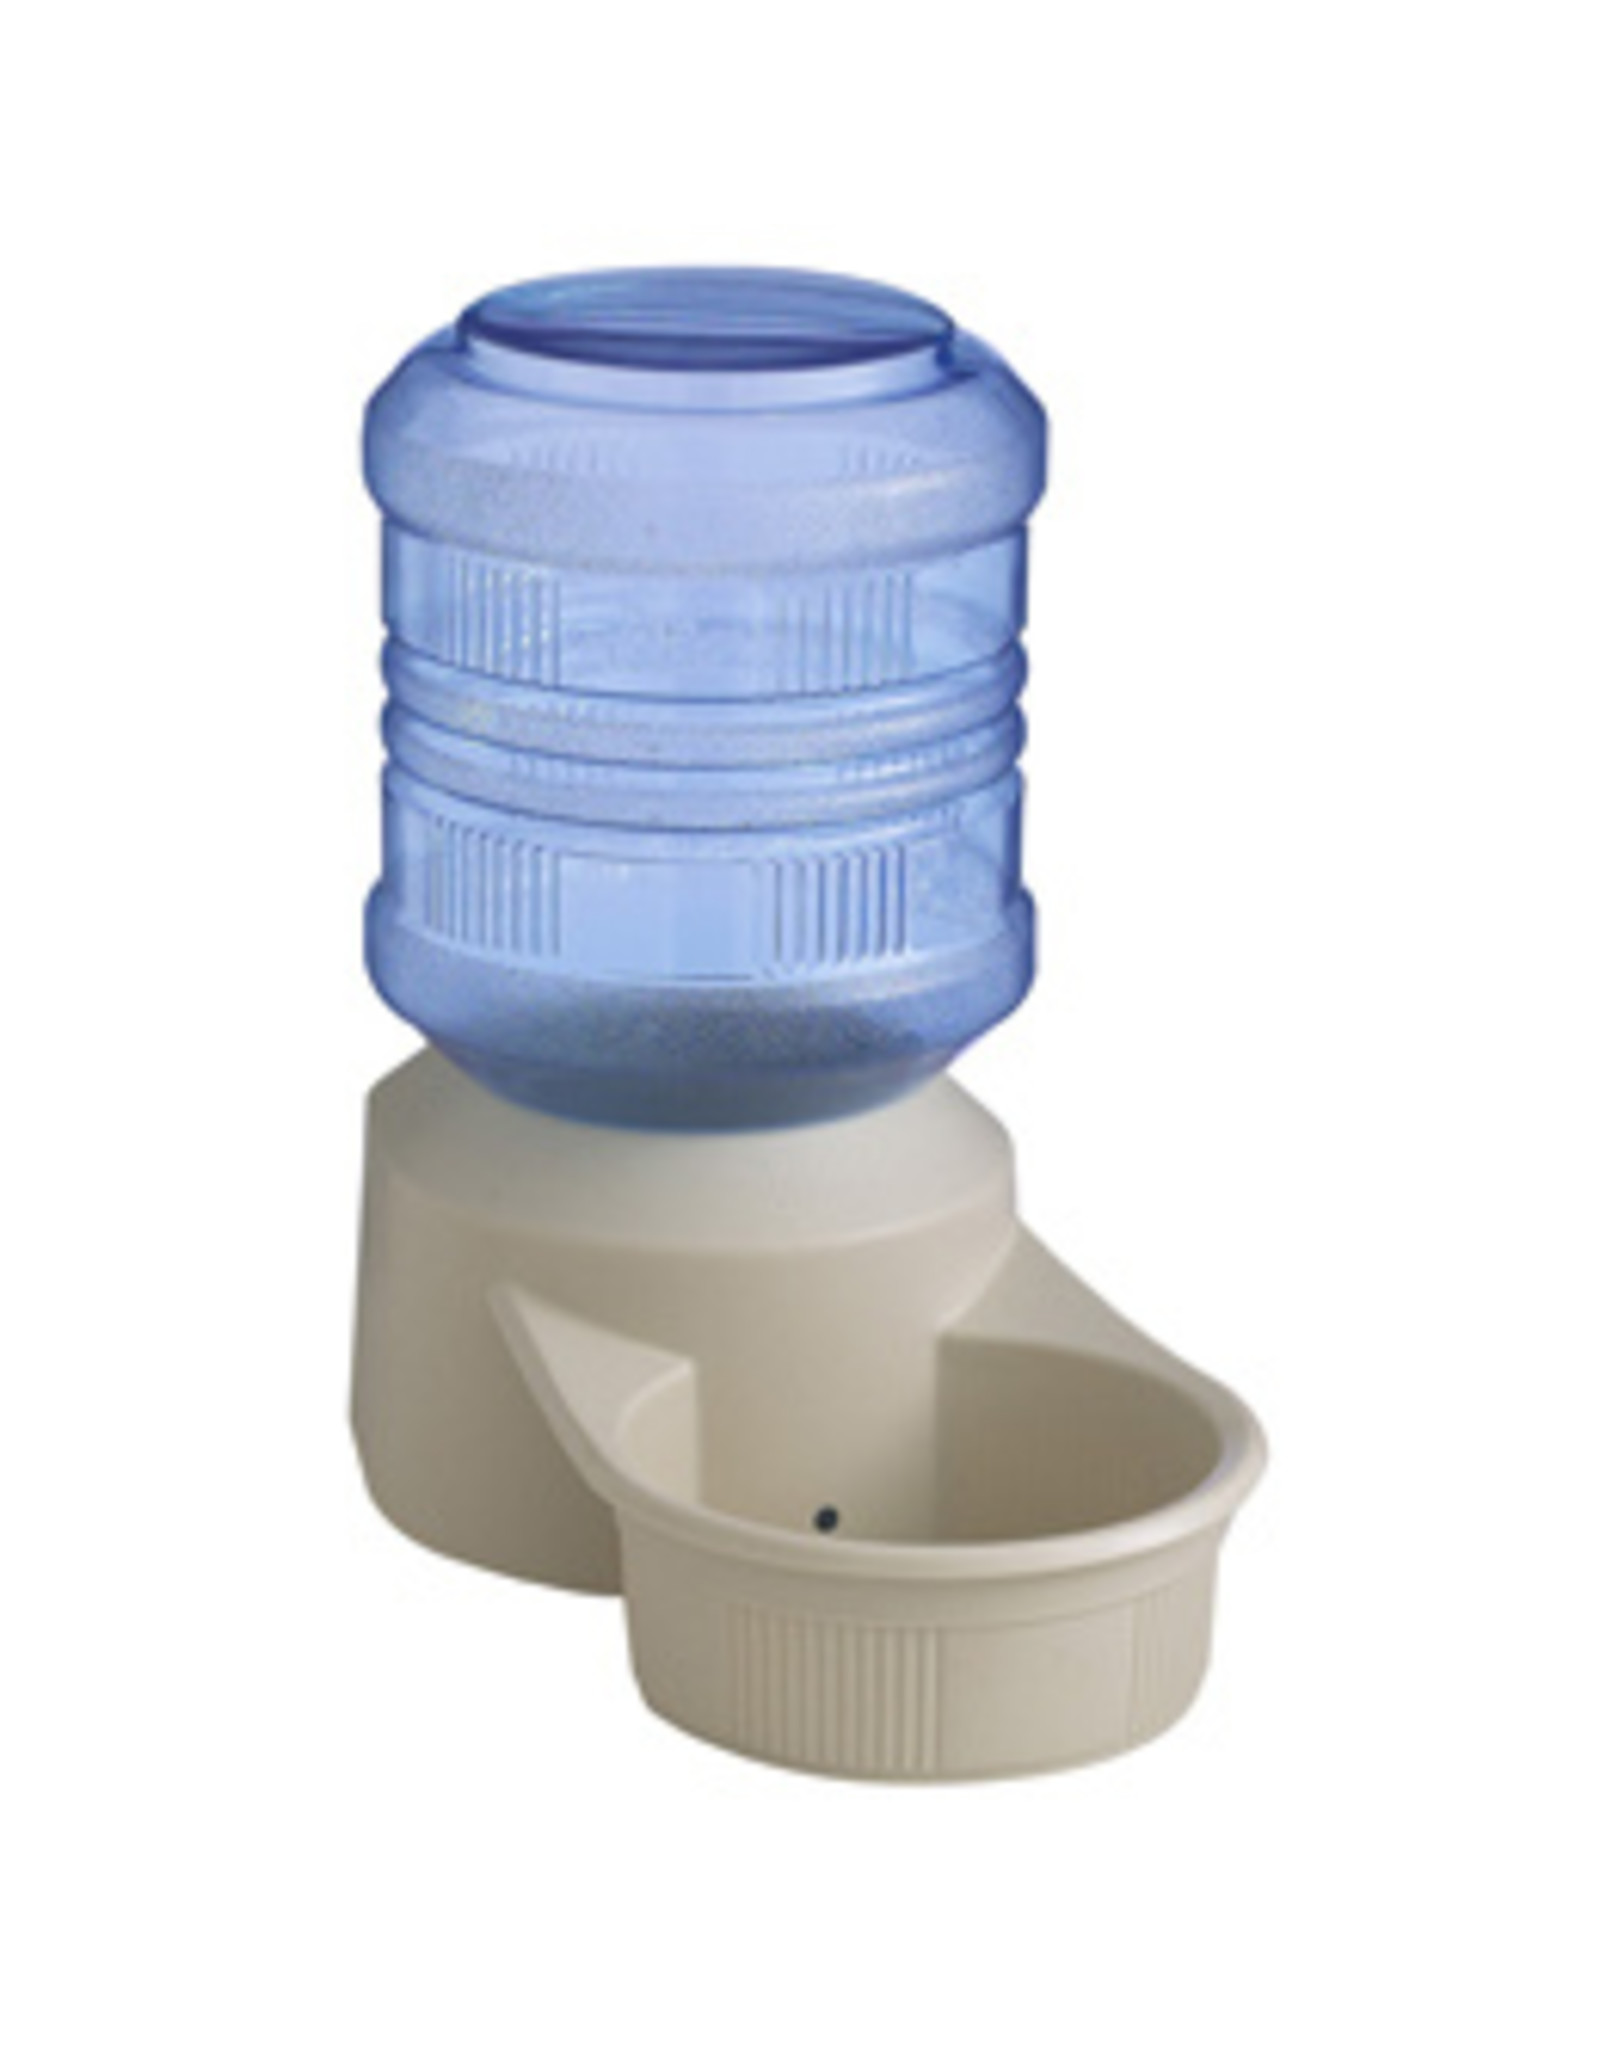 Pet Lodge Chow Tower Deluxe Waterer